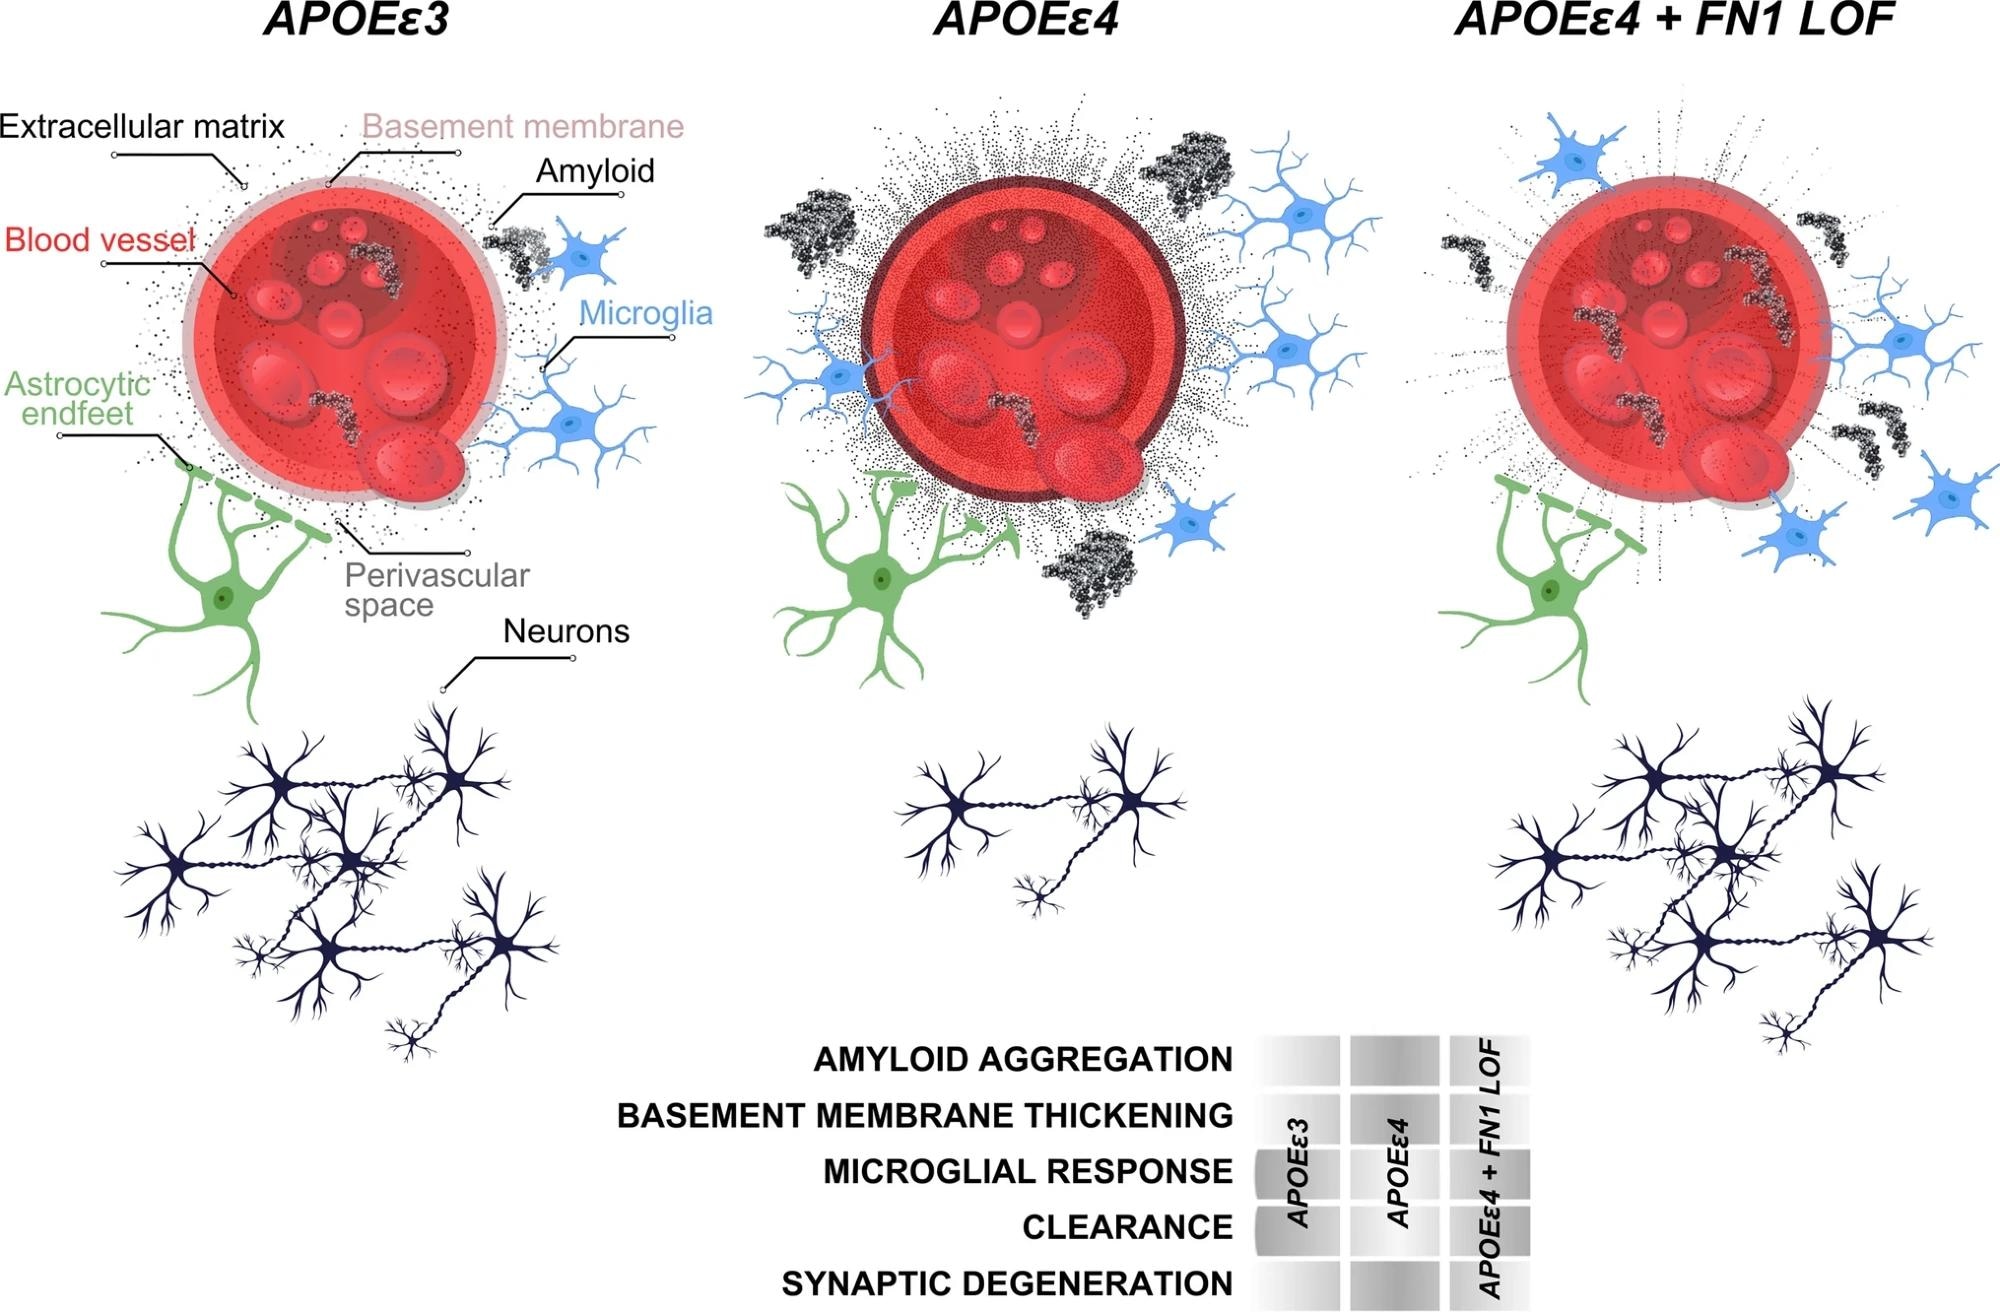 study unlocks genetic secrets in apoeε4 carriers that could defend against alzheimer's